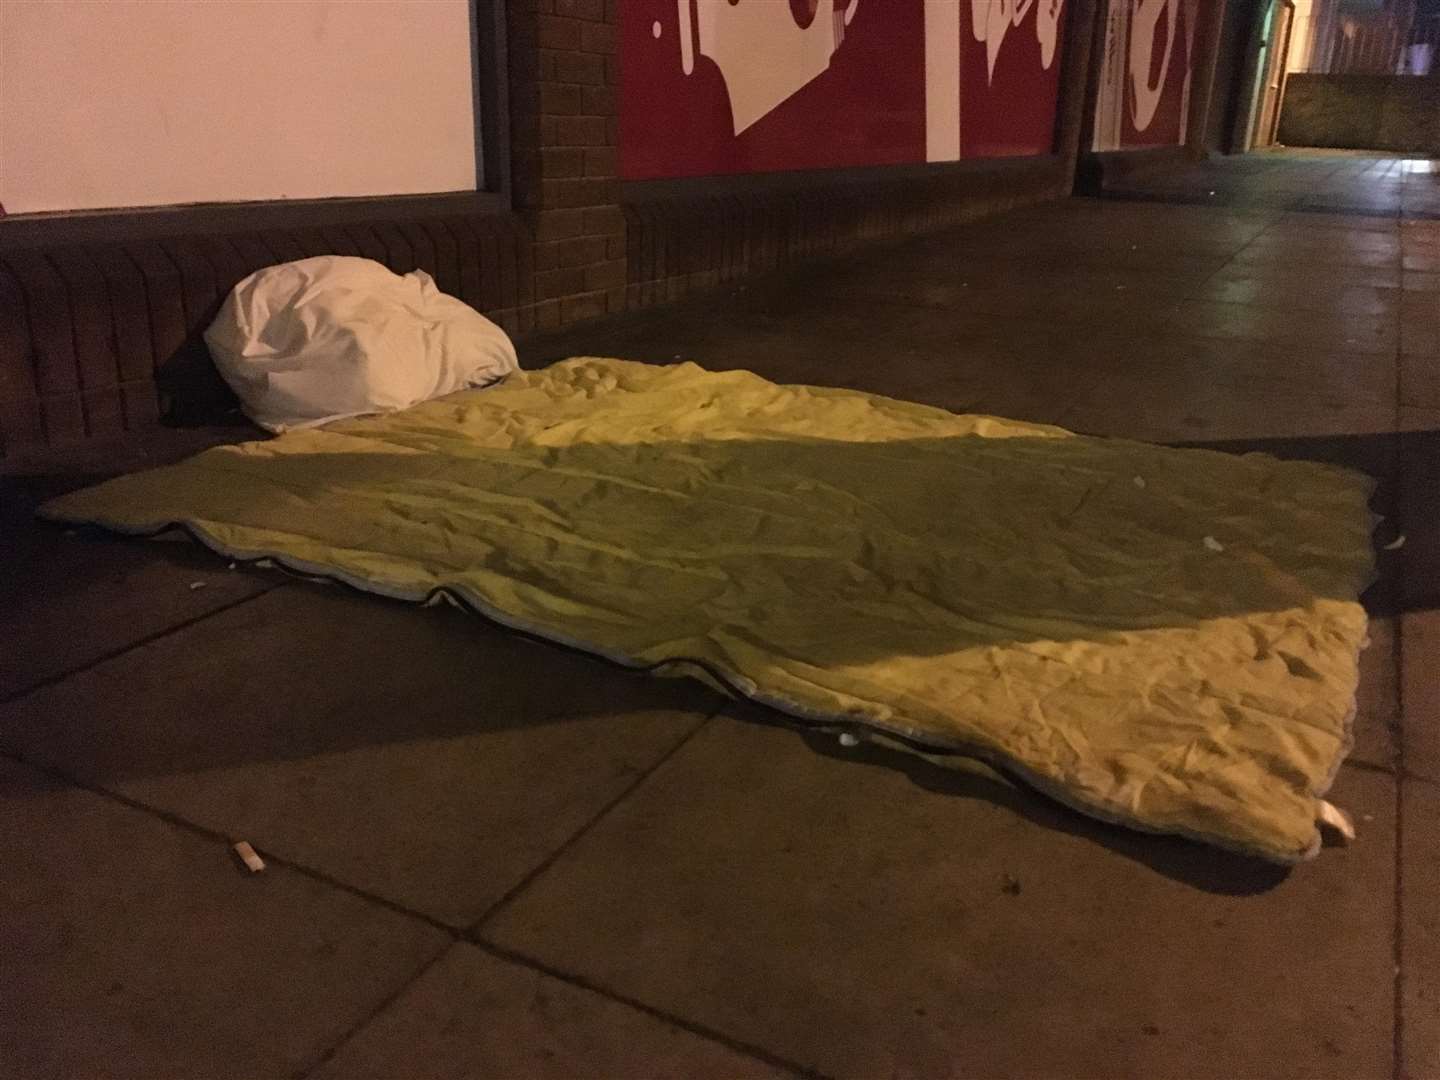 A neatly arranged sleeping bag and pillow outside Wilko